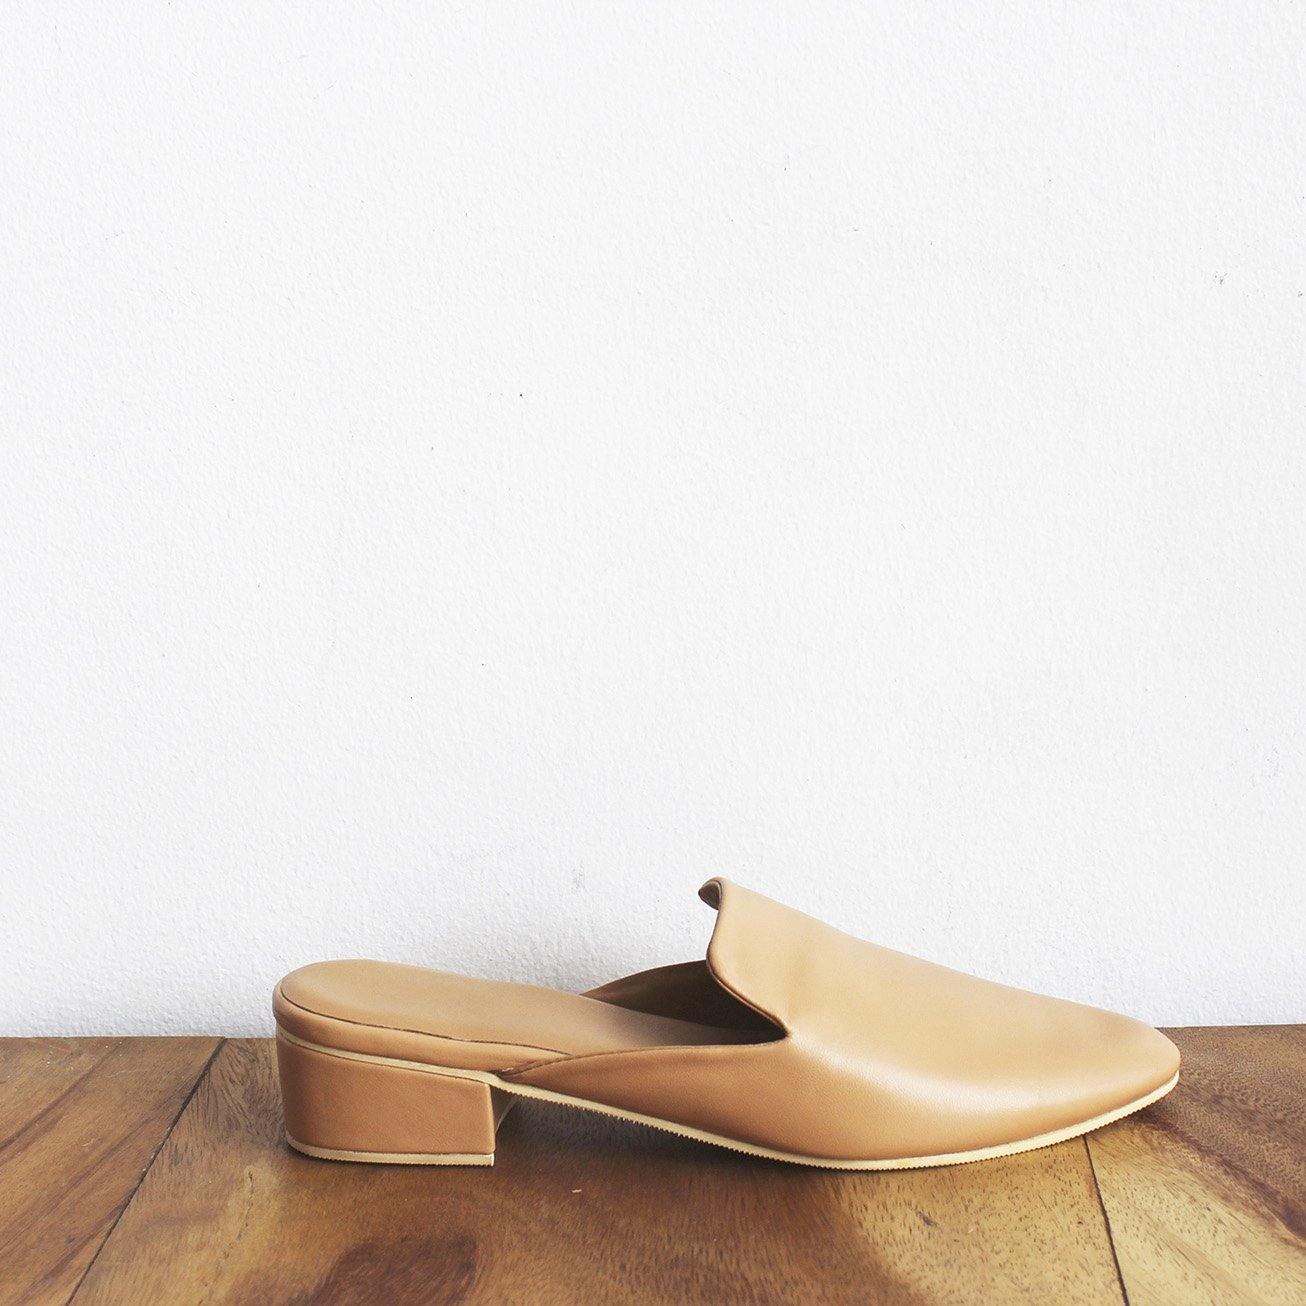 Loafer Mules (5 pairs per set) - Risque Manufacturing